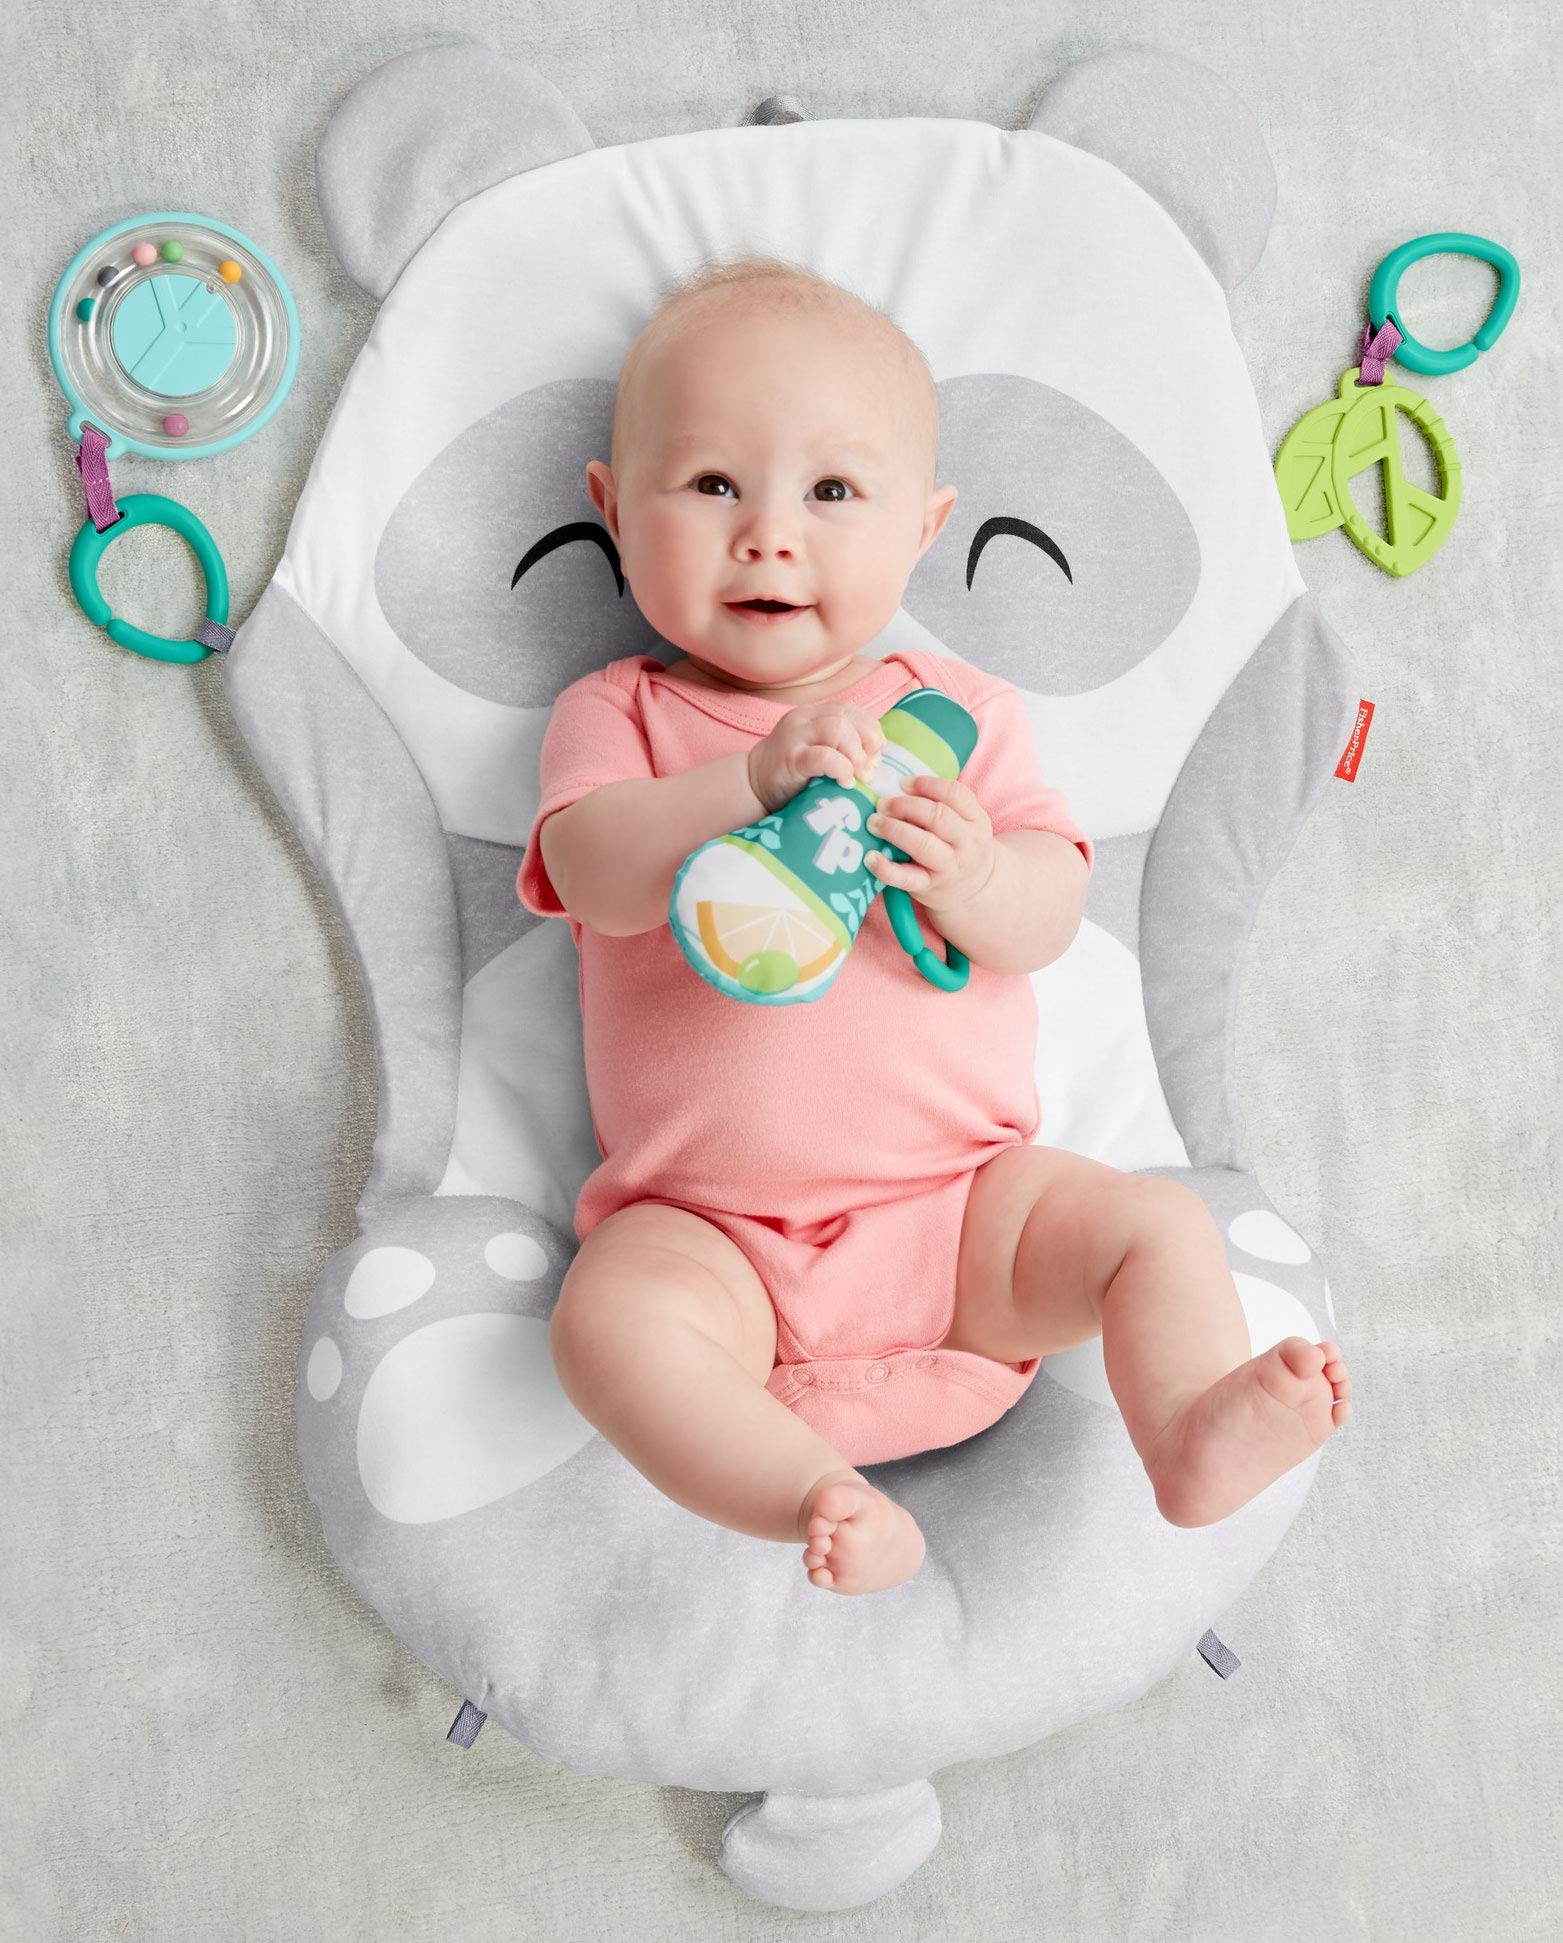 Fisher-Price All-in-One Panda Playmat, plush, take-along tummy time mat with baby rattle and teether toy for newborns from birth & up